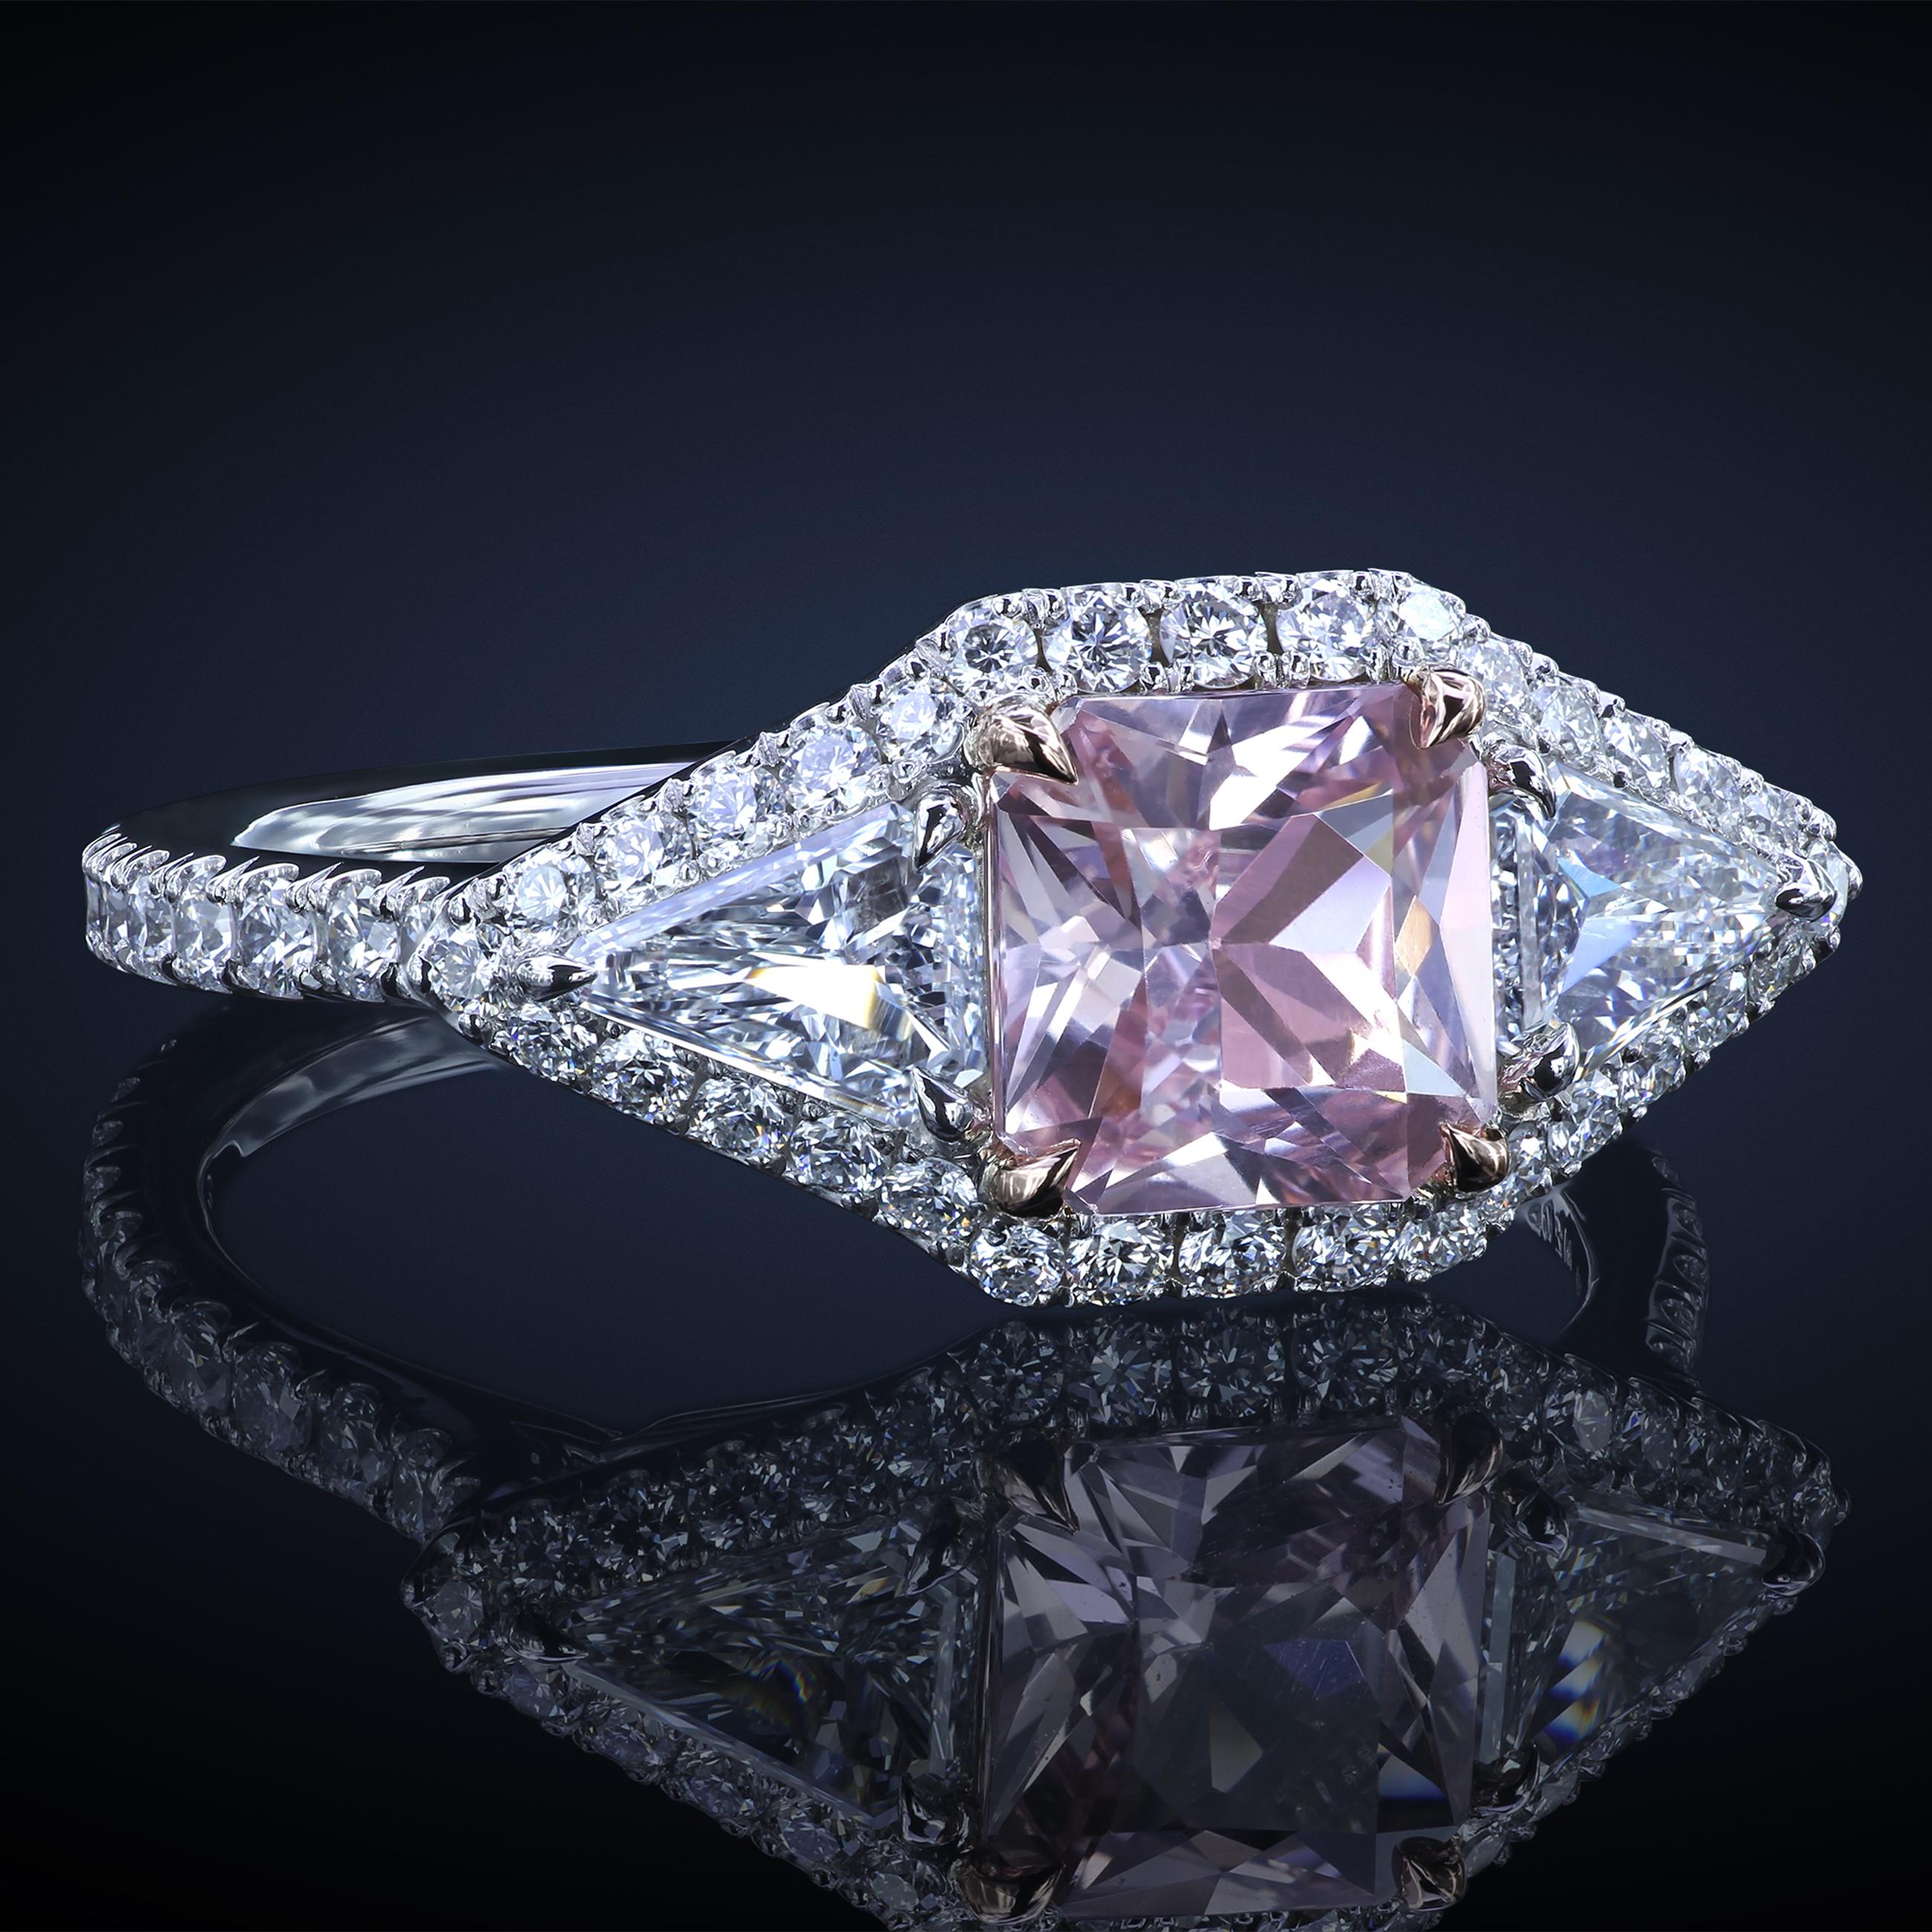 Leon Mege Montpassier Style Platinum Diamond Ring with a Natural Pink Sapphire In New Condition For Sale In New York, NY